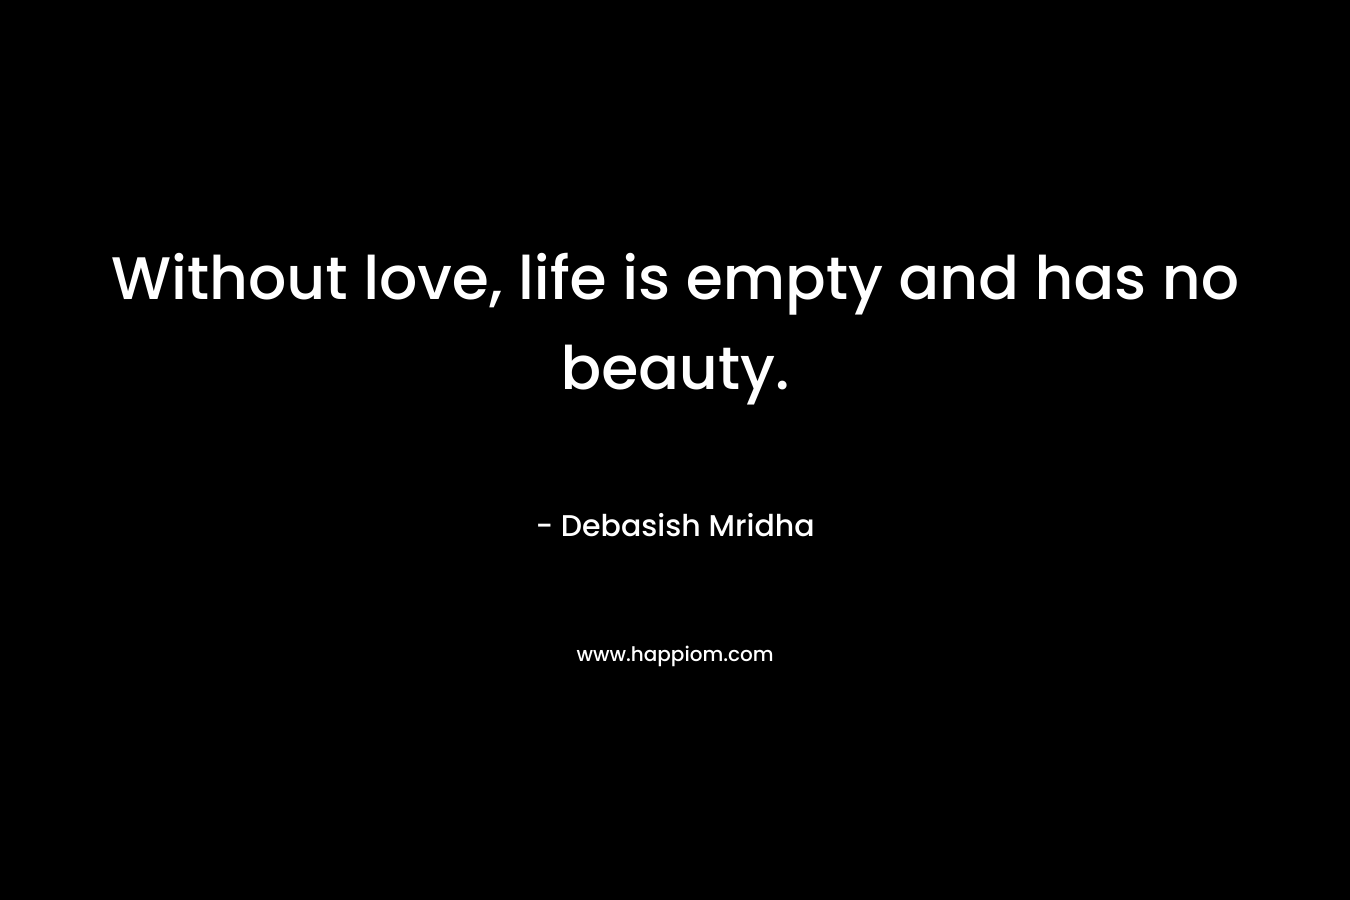 Without love, life is empty and has no beauty.